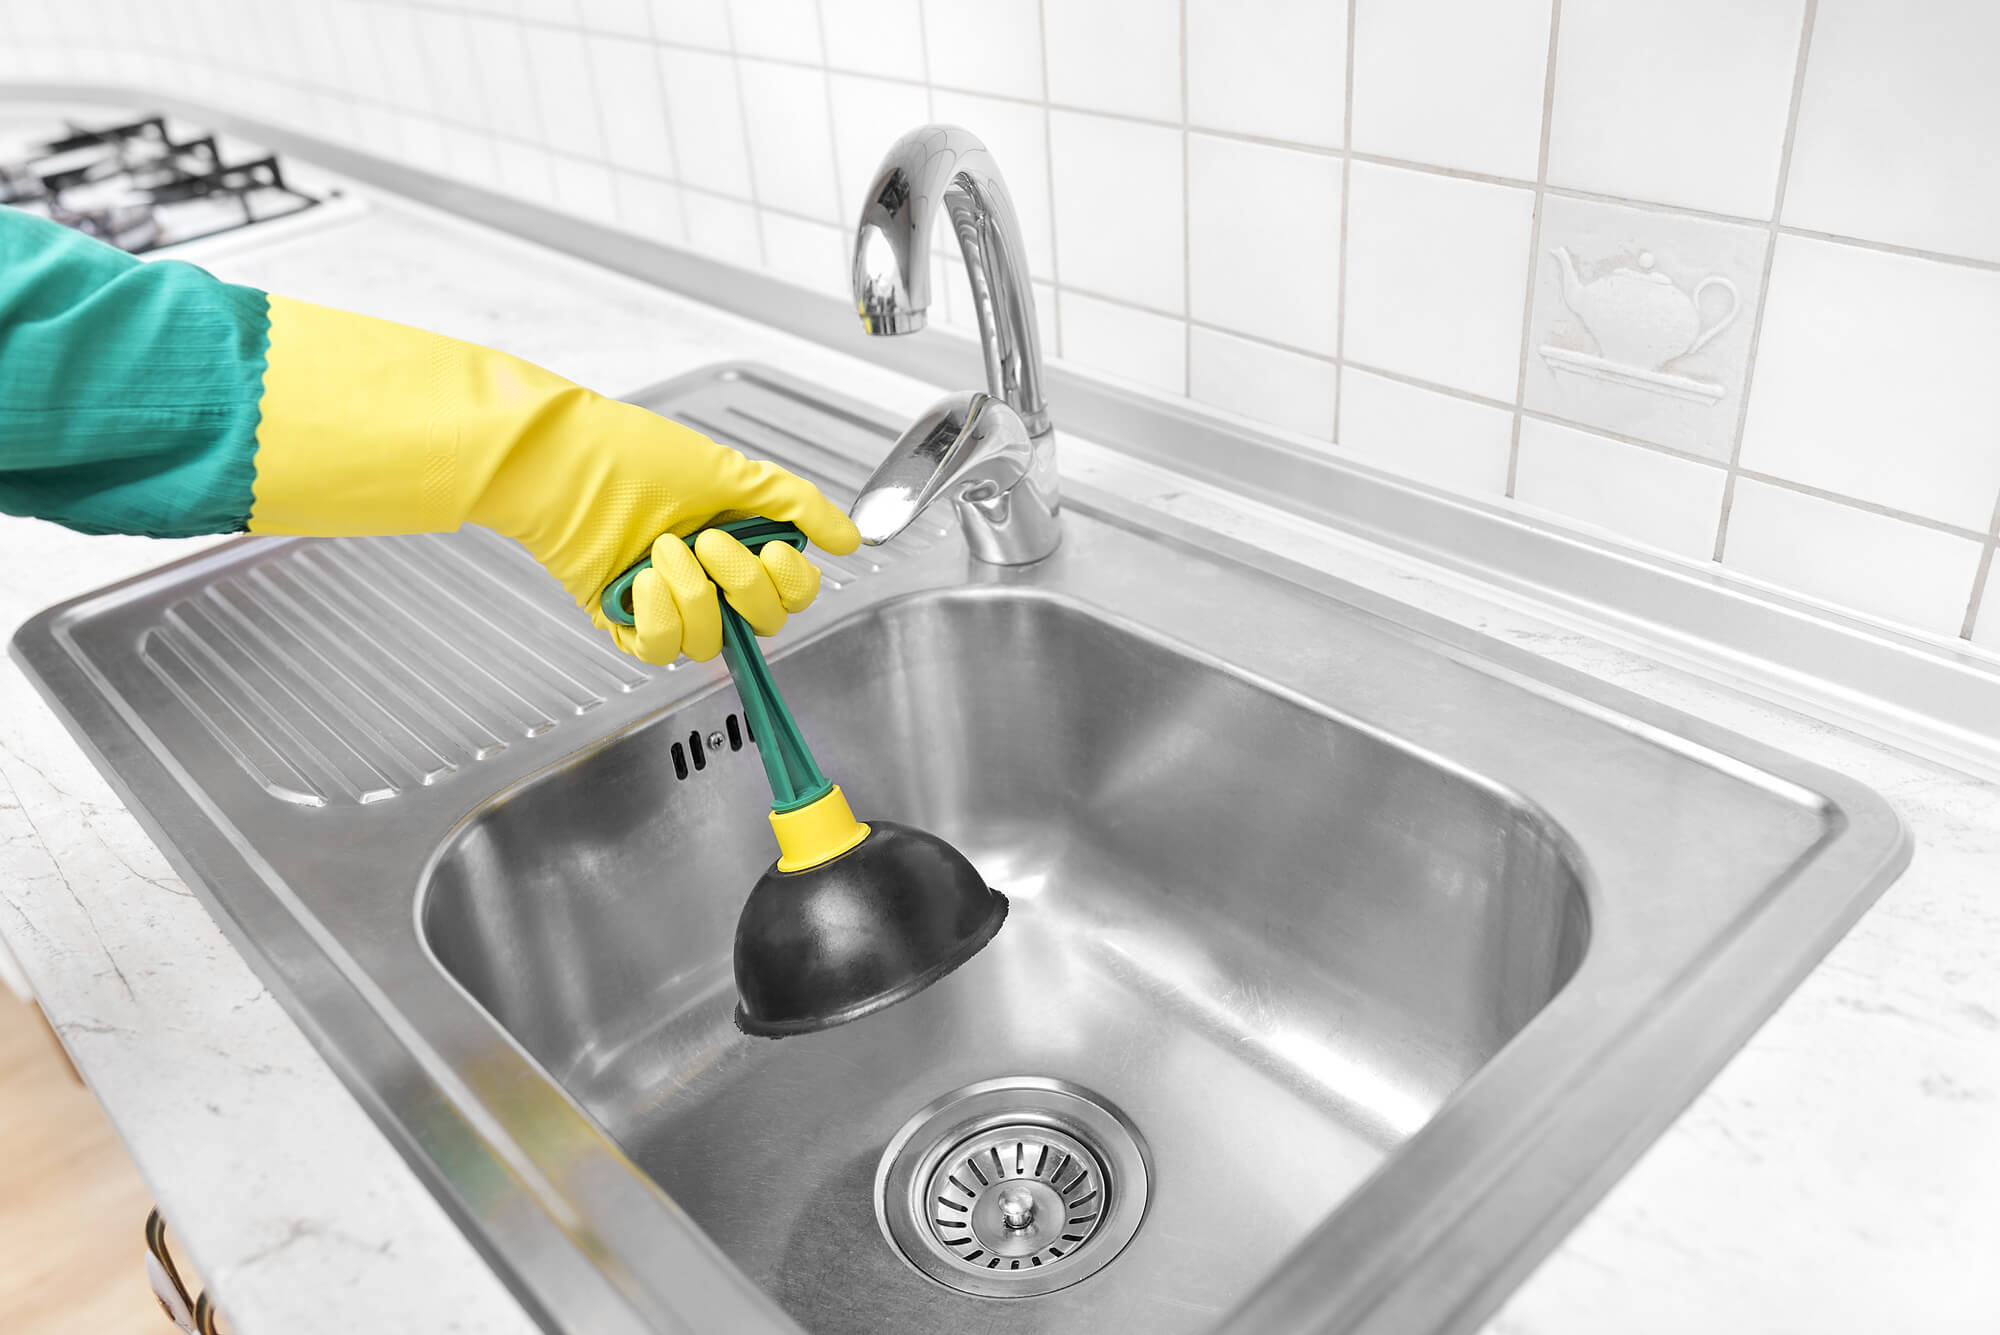 9 Helpful Home Remedies for Clearing Clogged Drains